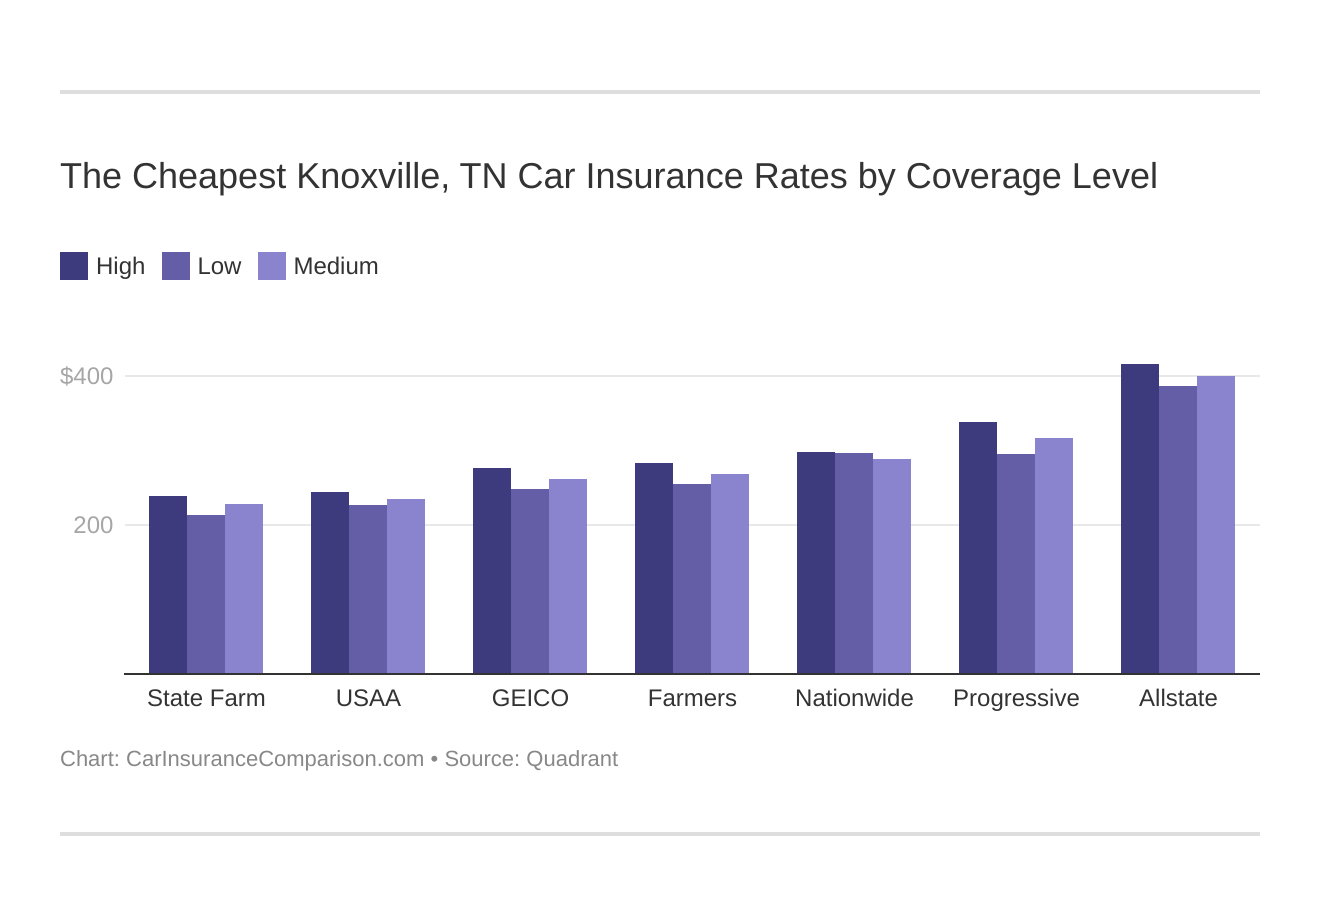 The Cheapest Knoxville, TN Car Insurance Rates by Coverage Level